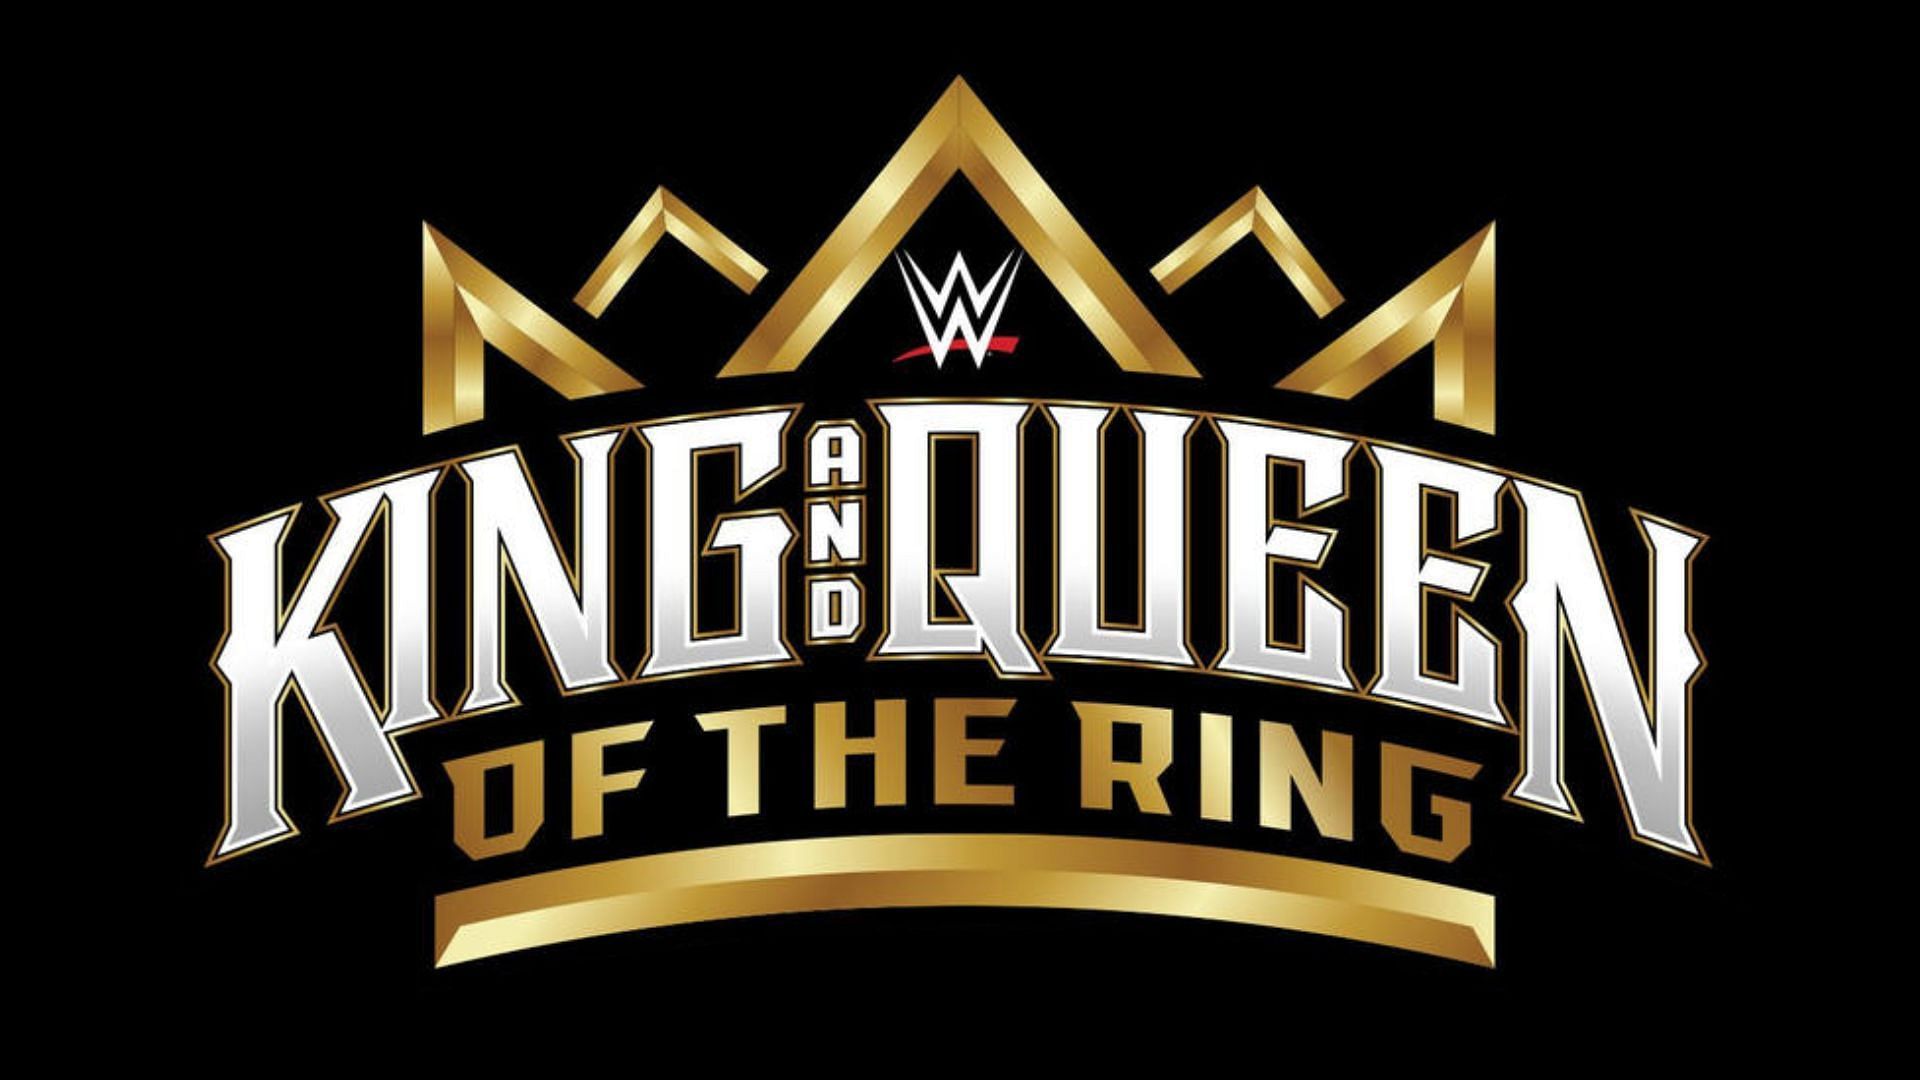 There may be a front runner already for 2023 King of the Ring